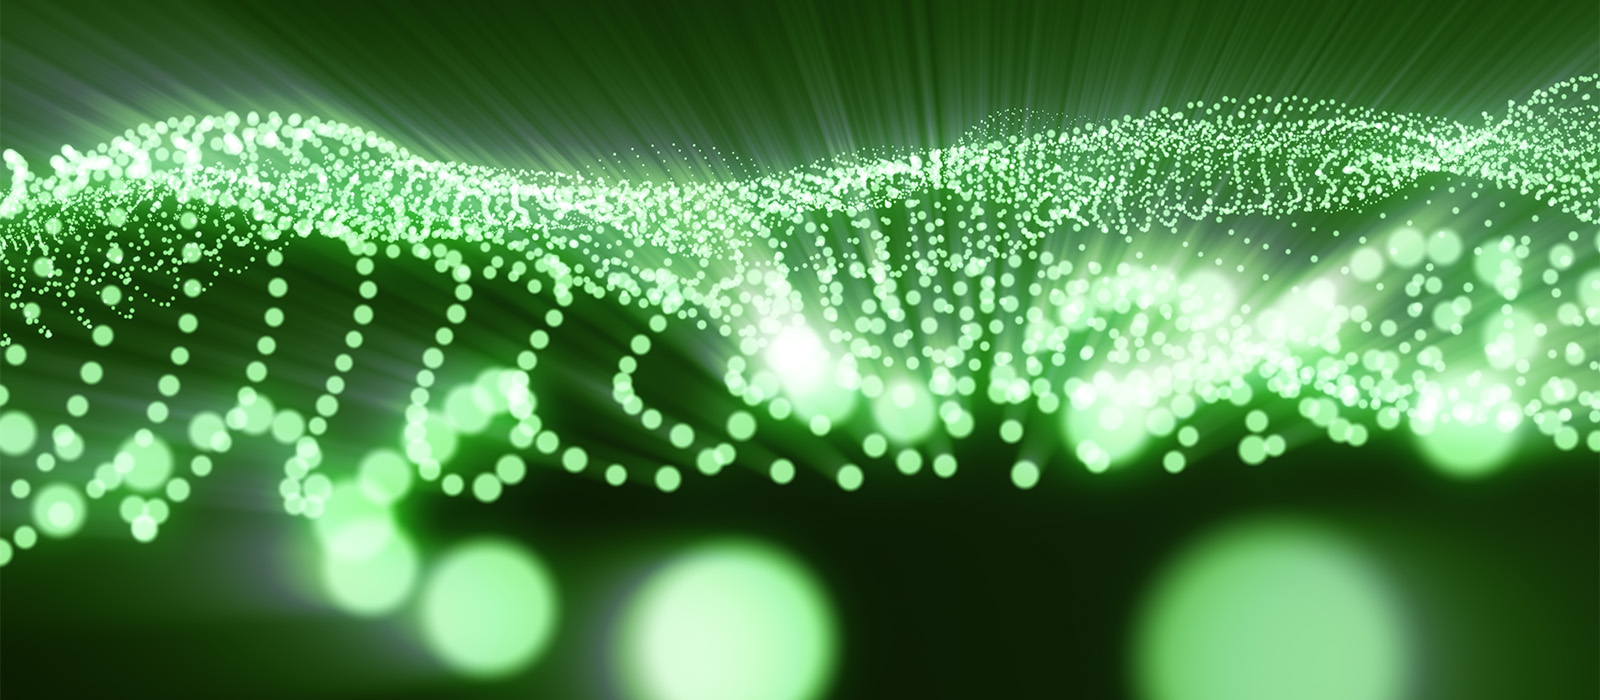 Wave of dots patterns bursting with light, symbolizing the dynamic unlocking of IoT data at the edge.